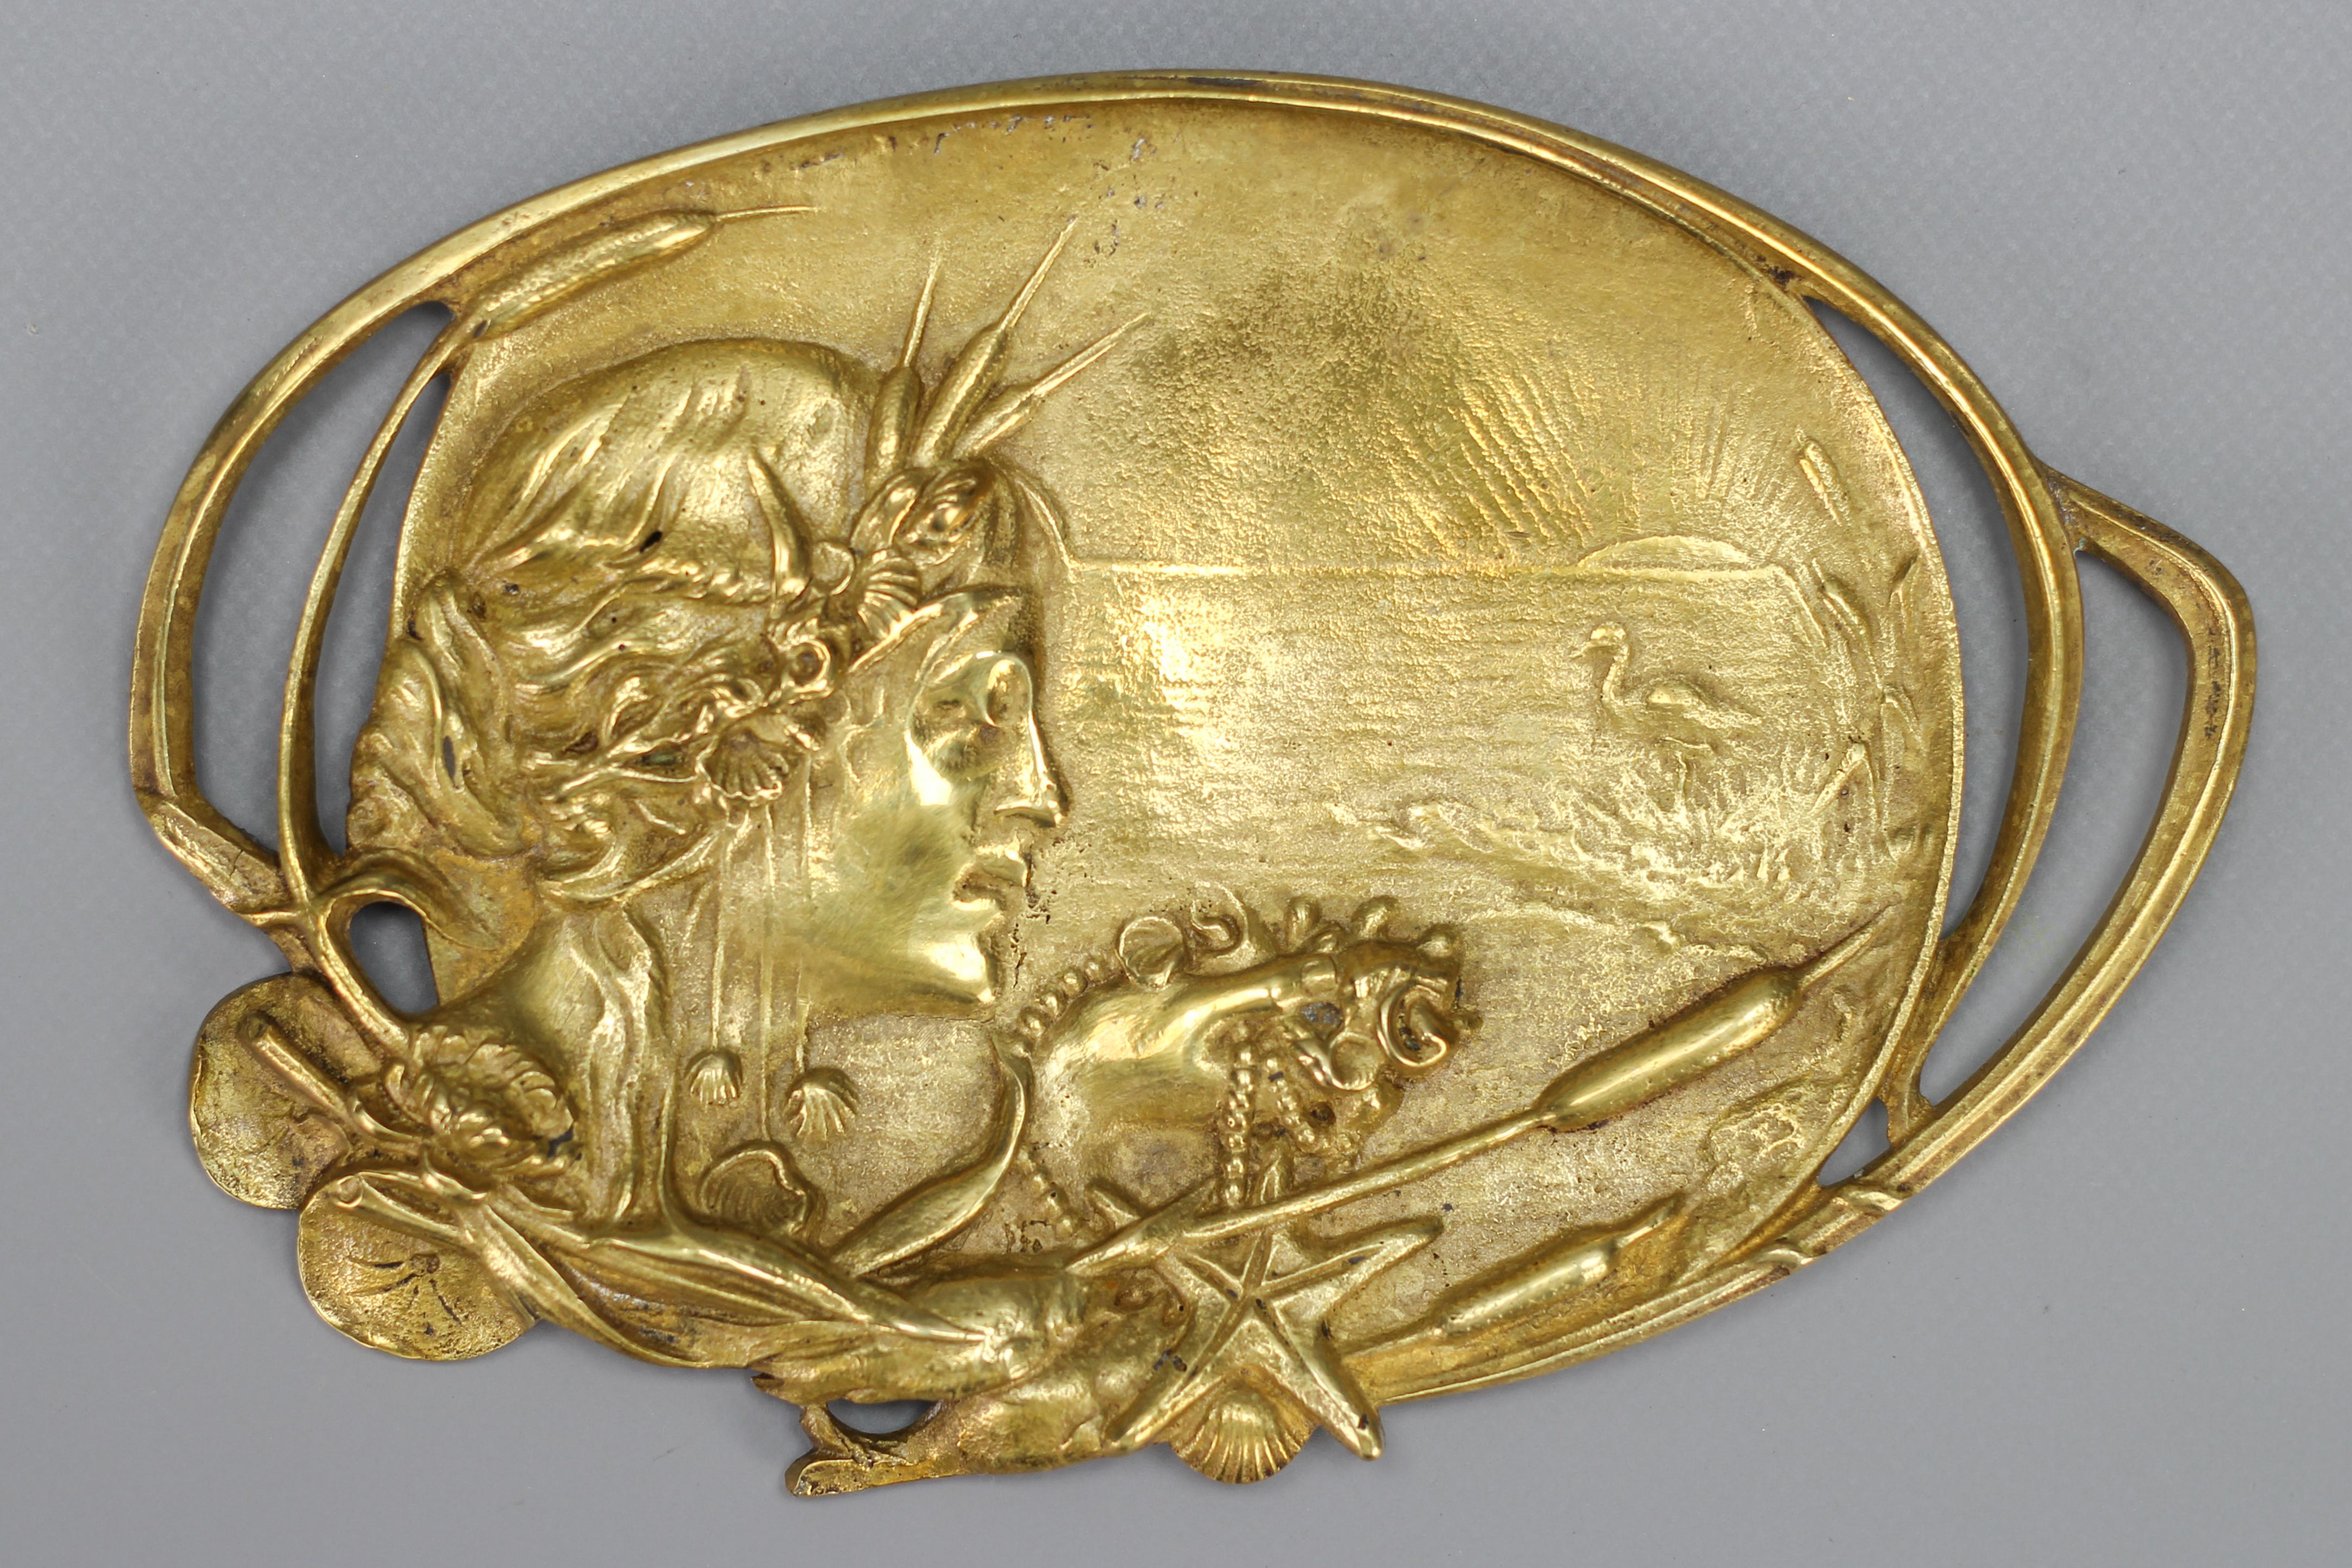 French Art Nouveau Bronze card tray or Pin Tray, Vide - Poche, 1920s
This absolutely adorable card tray or pin tray, Vide - Poche, is made of bronze and features in a relief a profile of a mermaid, adorned with a shell and water plants, which is